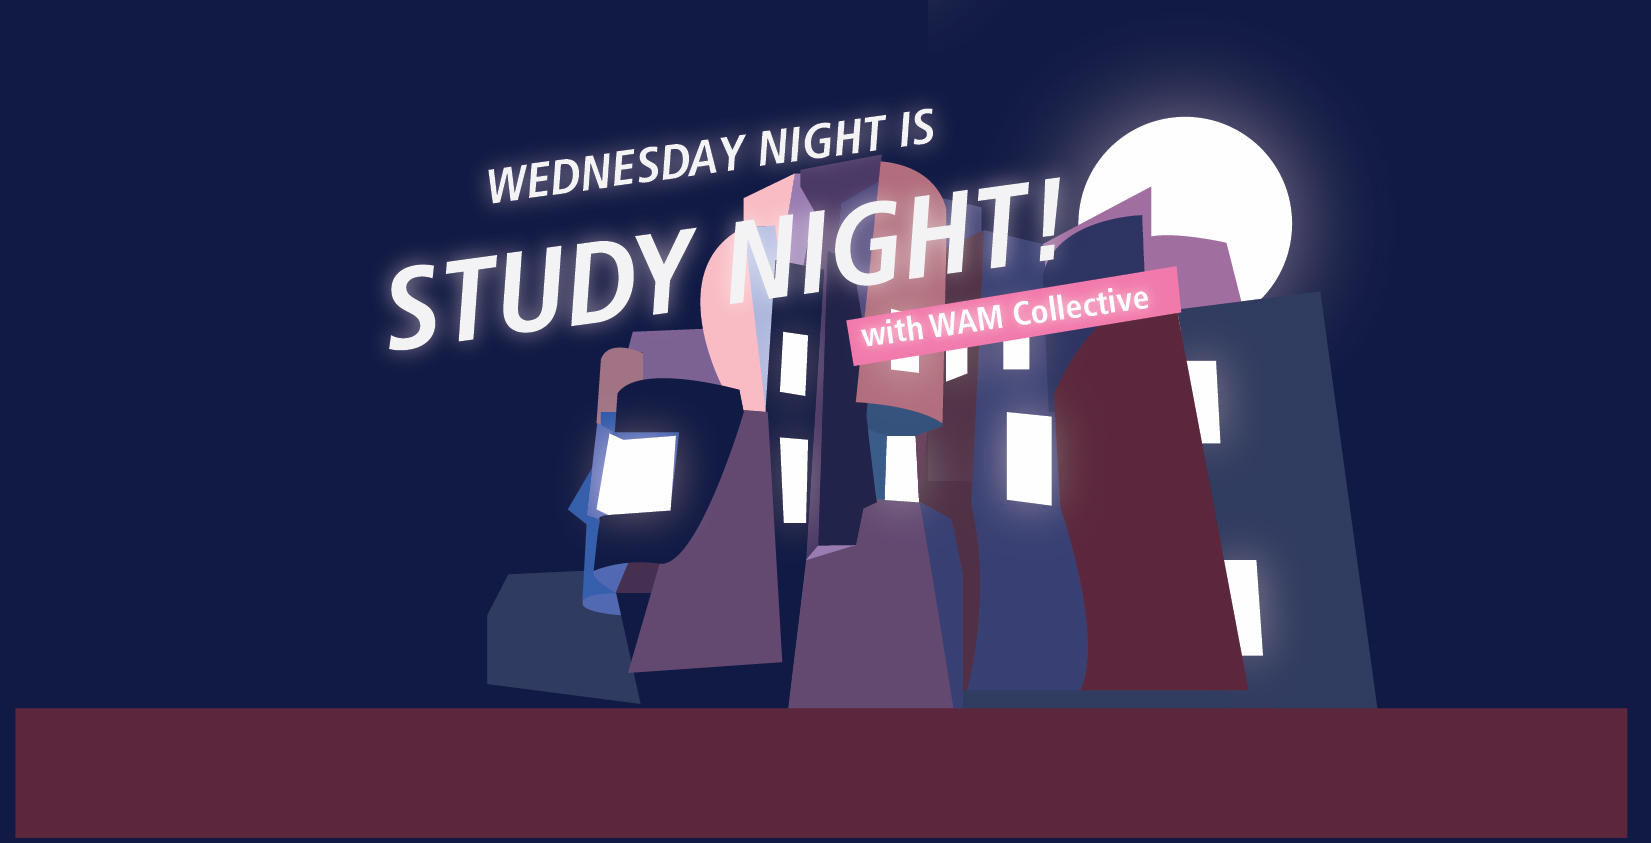 Illustration of the WAM building with text: Wednesdays Night is Study Night! with WAM Collective.